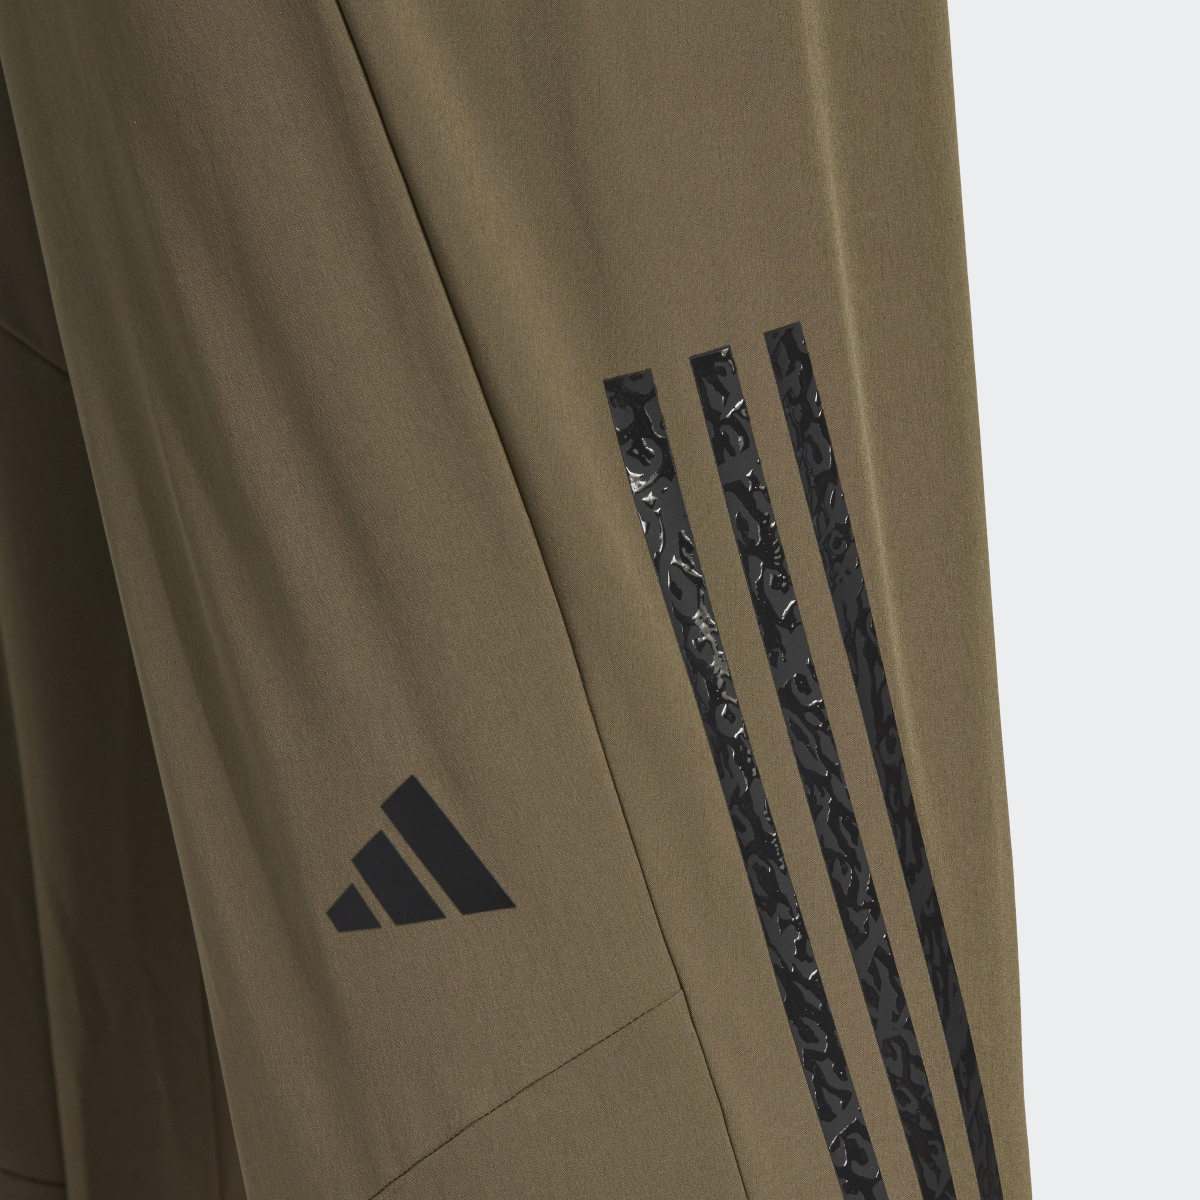 Adidas Pantalon HIIT Curated By Cody Rigsby. 5